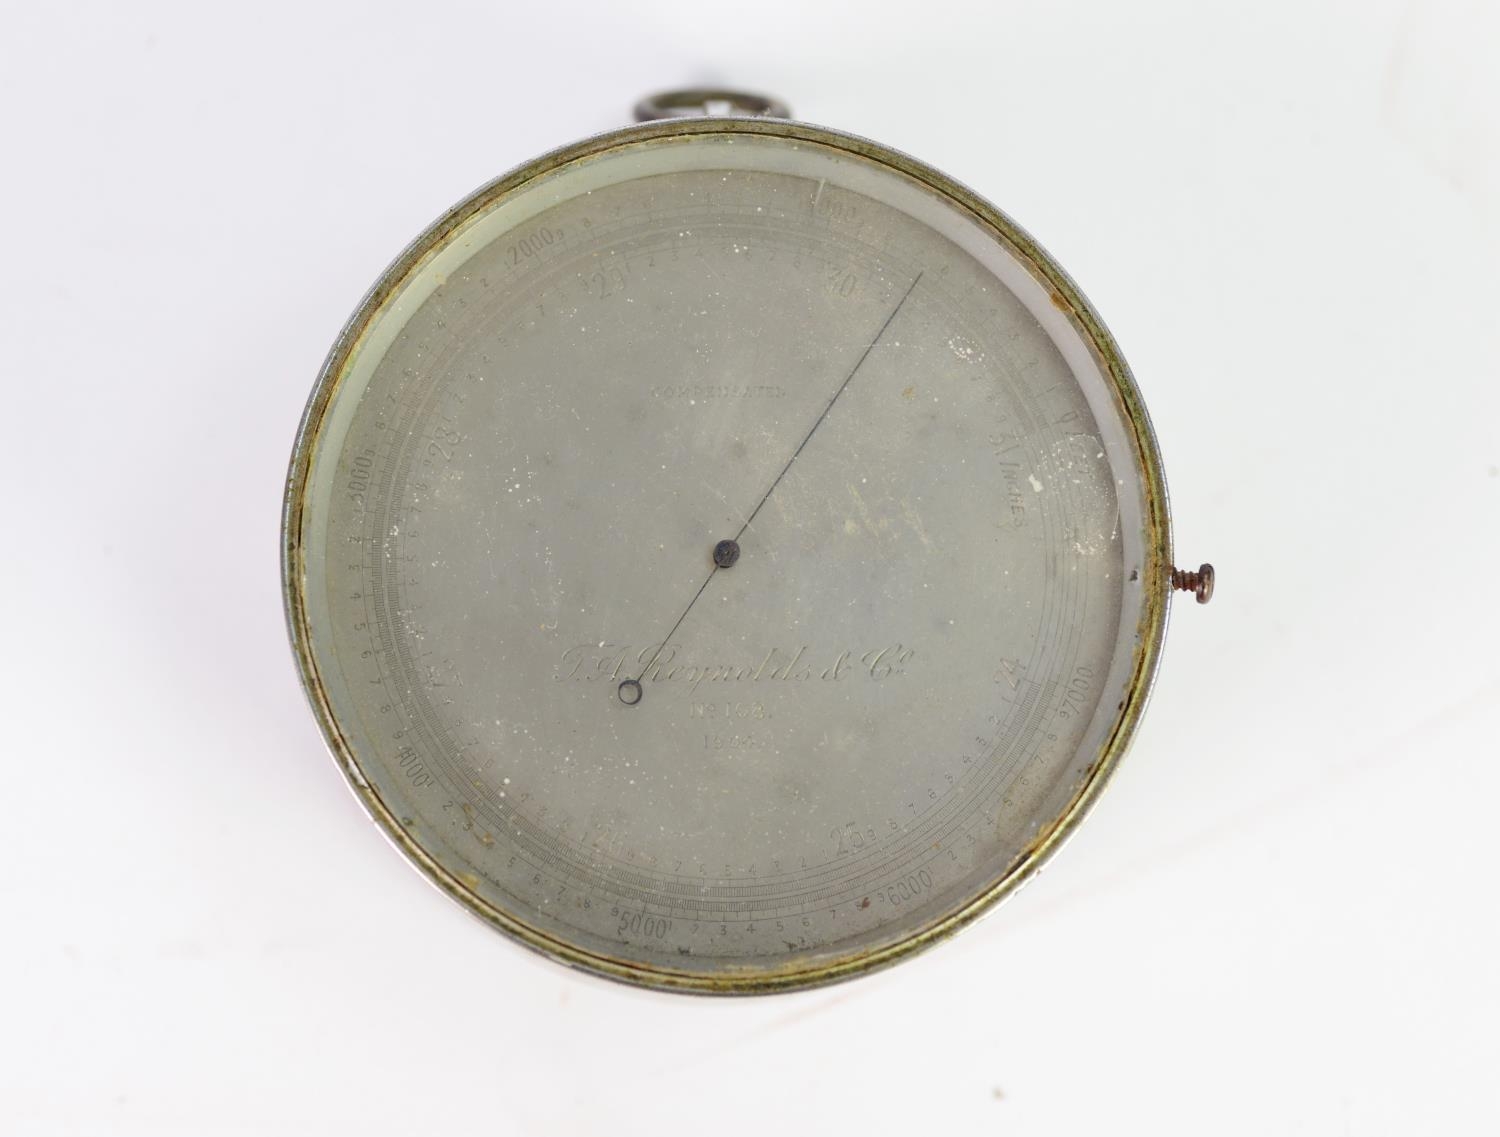 T.A. REYNOLDS WALL MOUNTED COMPENSATED BAROMETER, with silvered dial, 4 ½? (11.4cm) diameter - Image 2 of 2